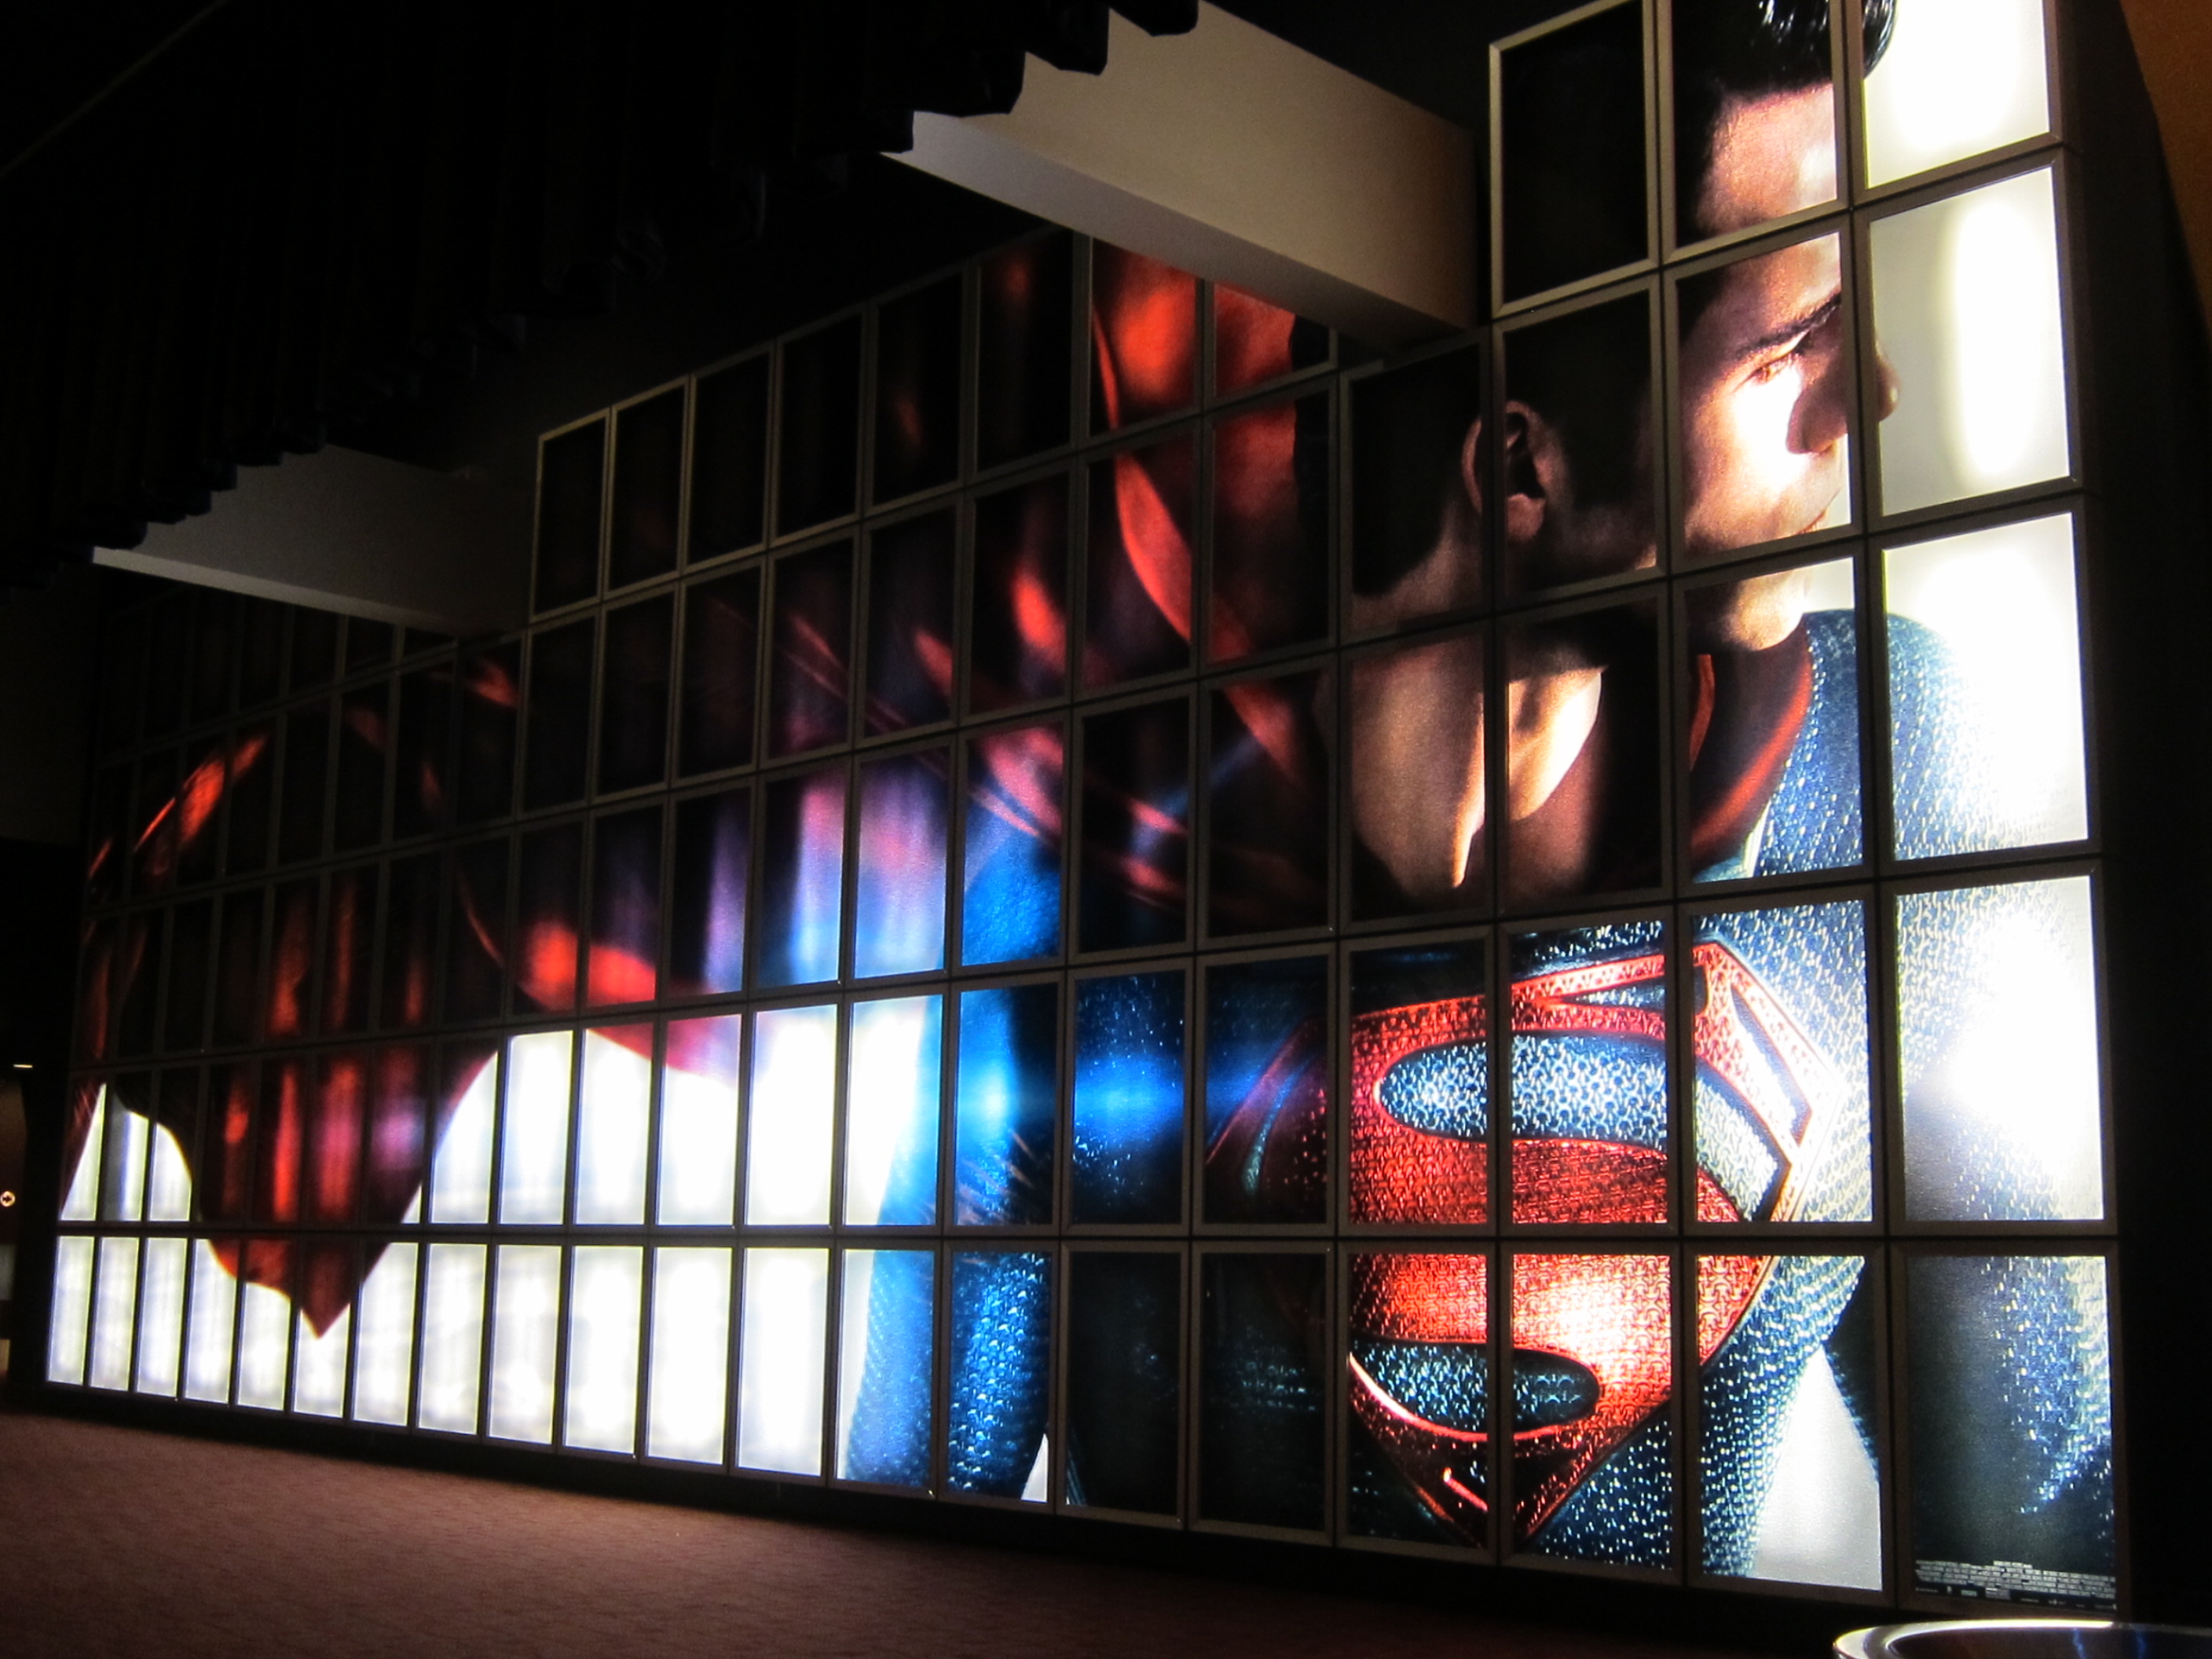 MAN OF STEEL backlit wall display at the ArcLight Sherman Oaks.